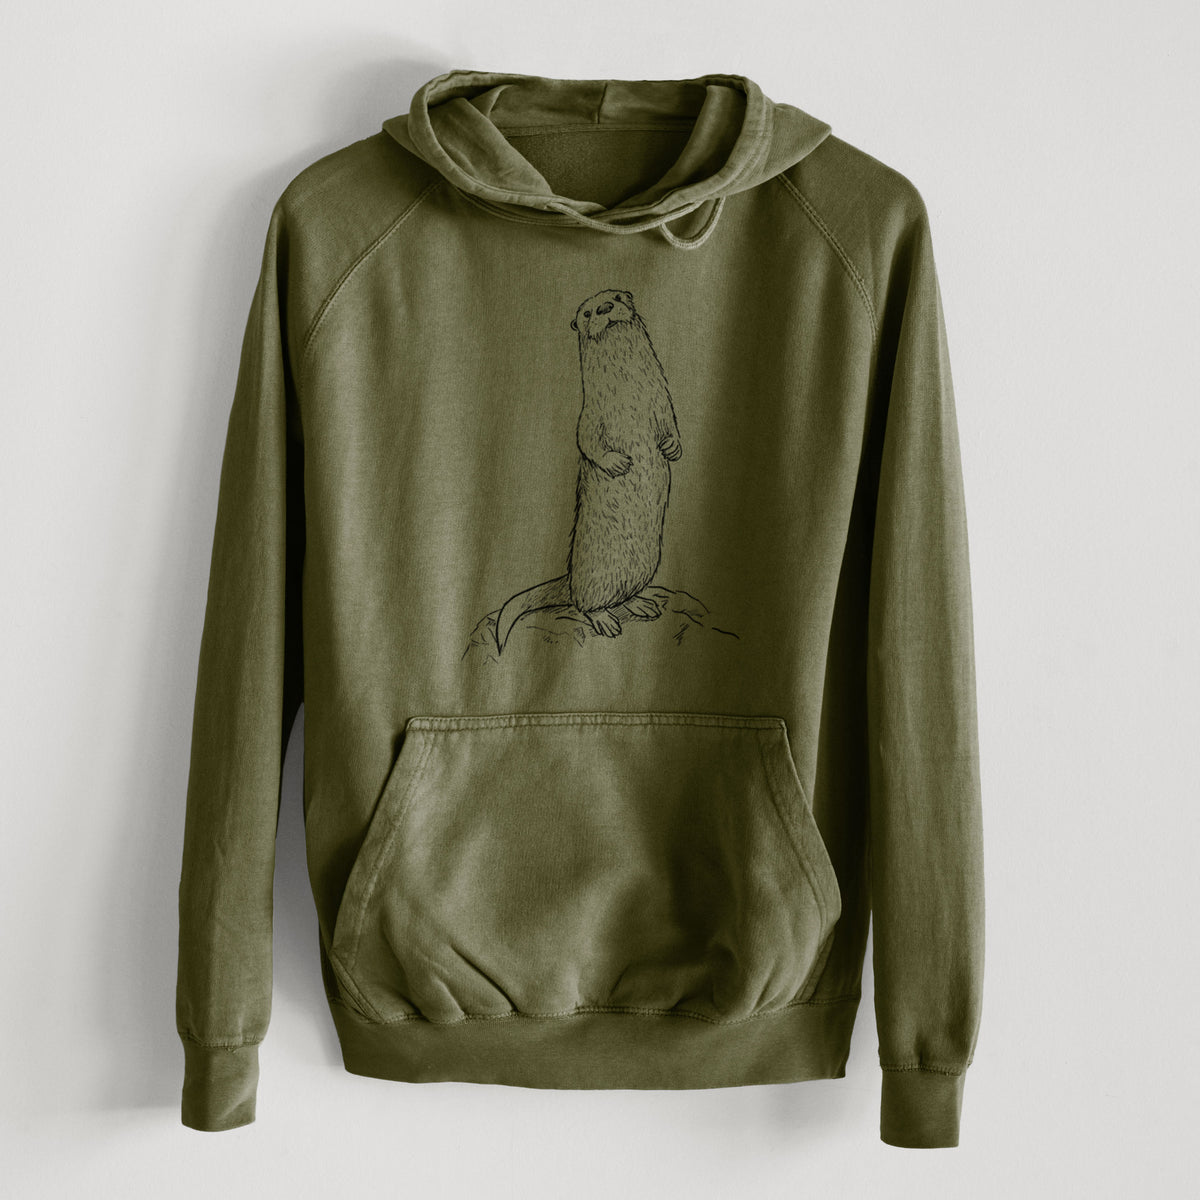 North American River Otter - Lontra canadensis  - Mid-Weight Unisex Vintage 100% Cotton Hoodie